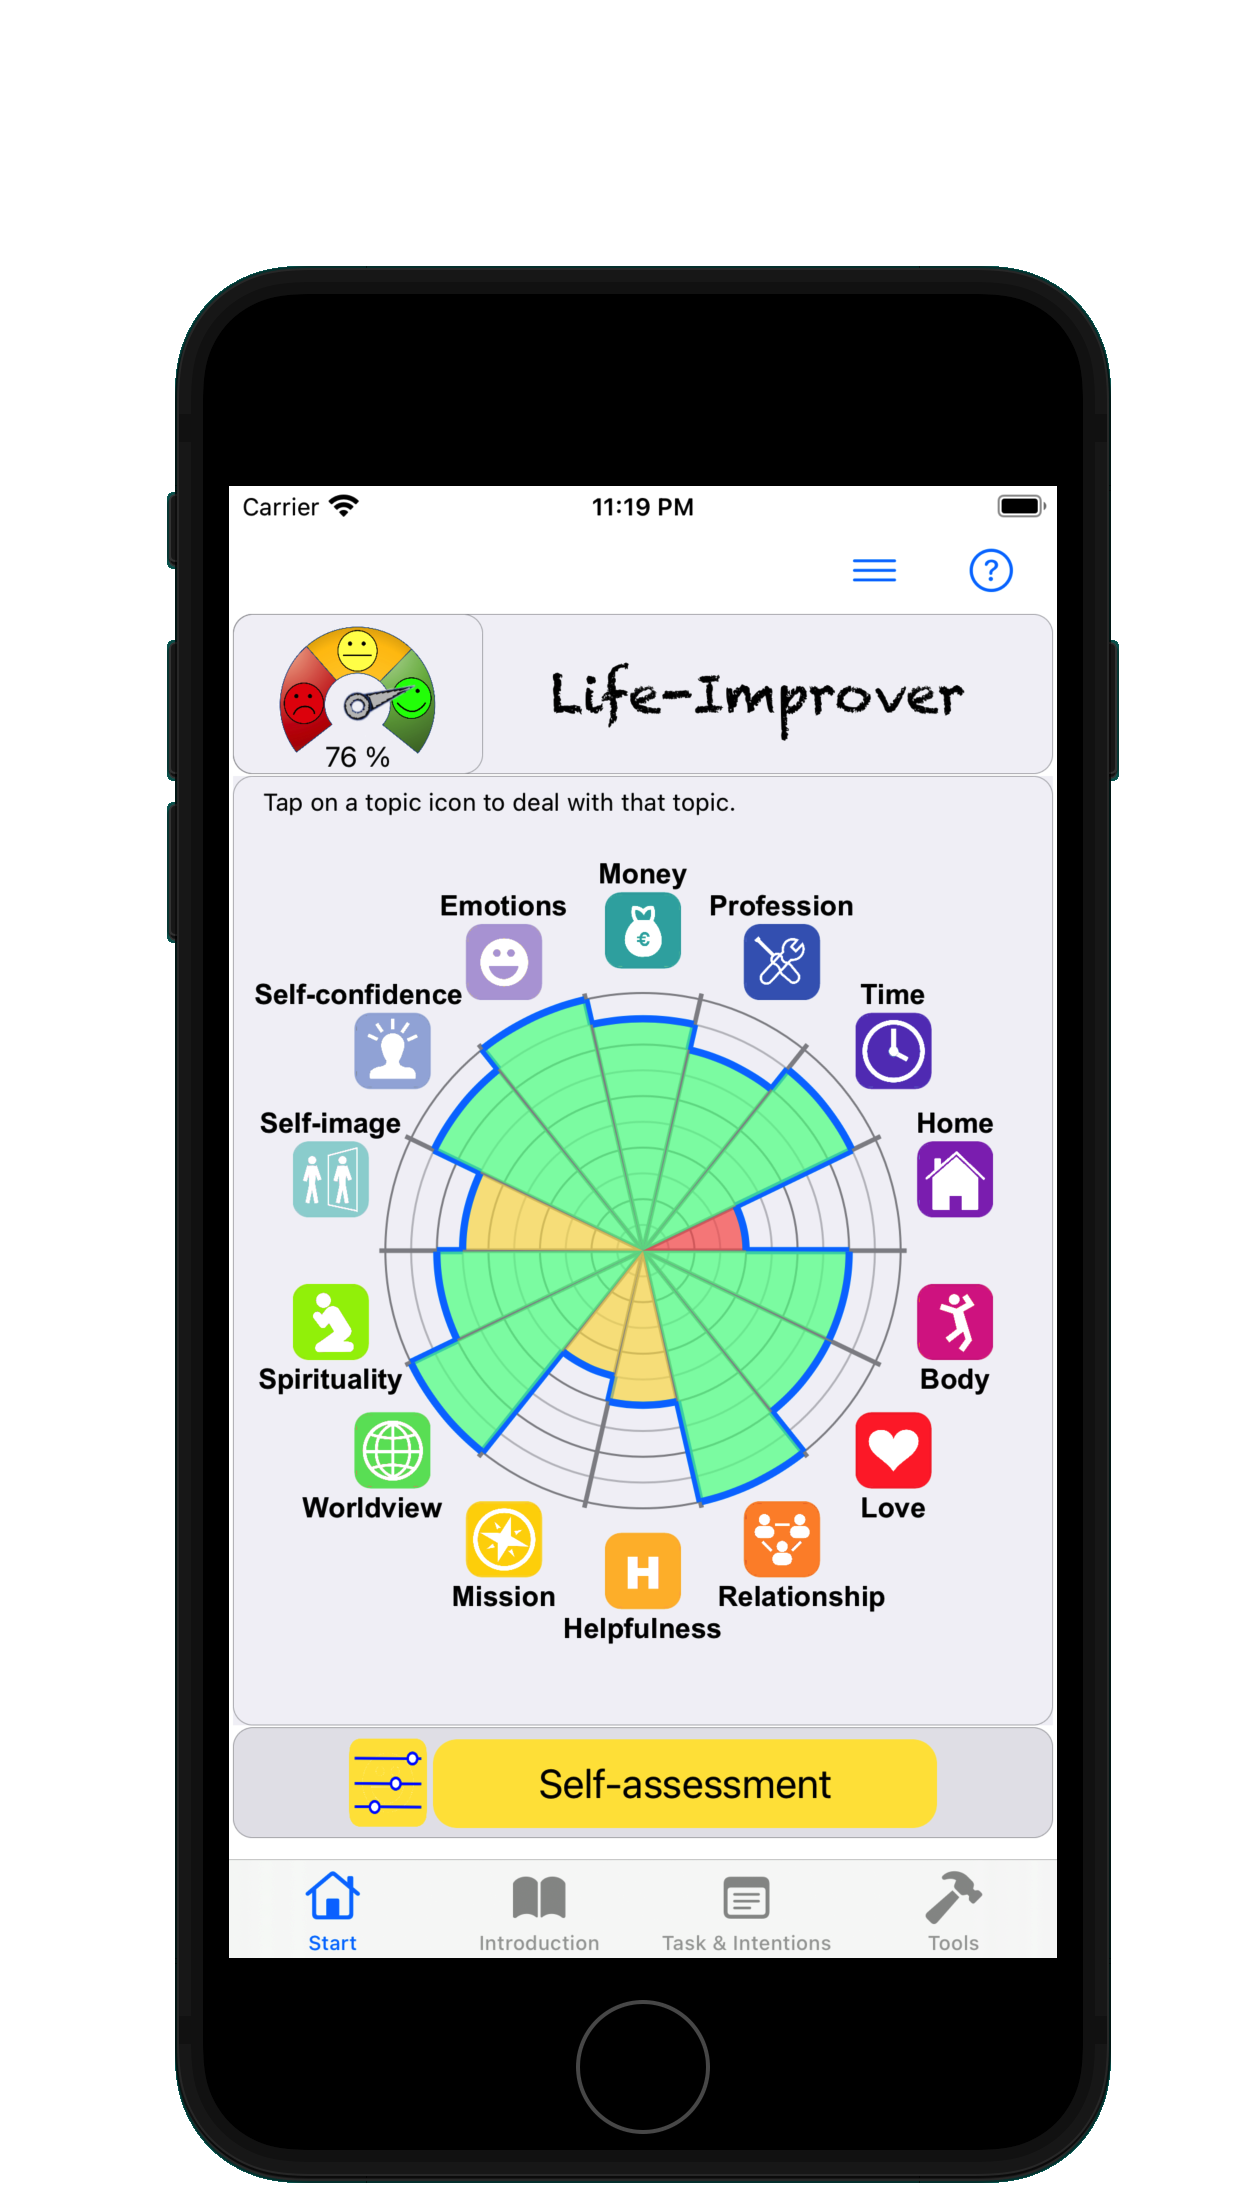 Start Page of the Life-Improver app